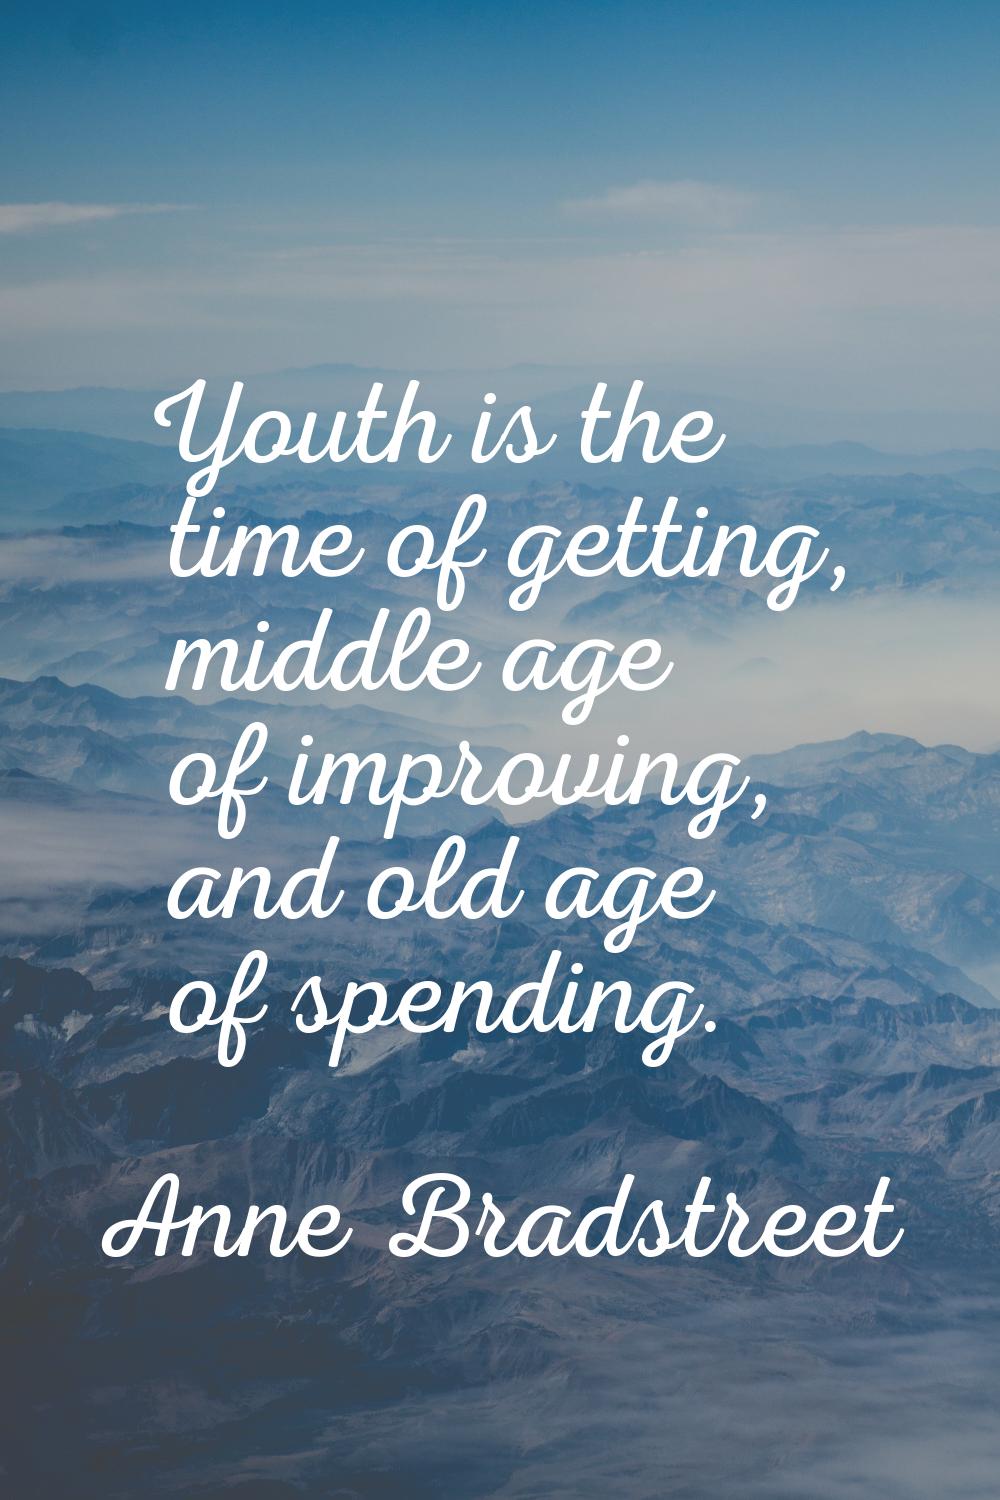 Youth is the time of getting, middle age of improving, and old age of spending.